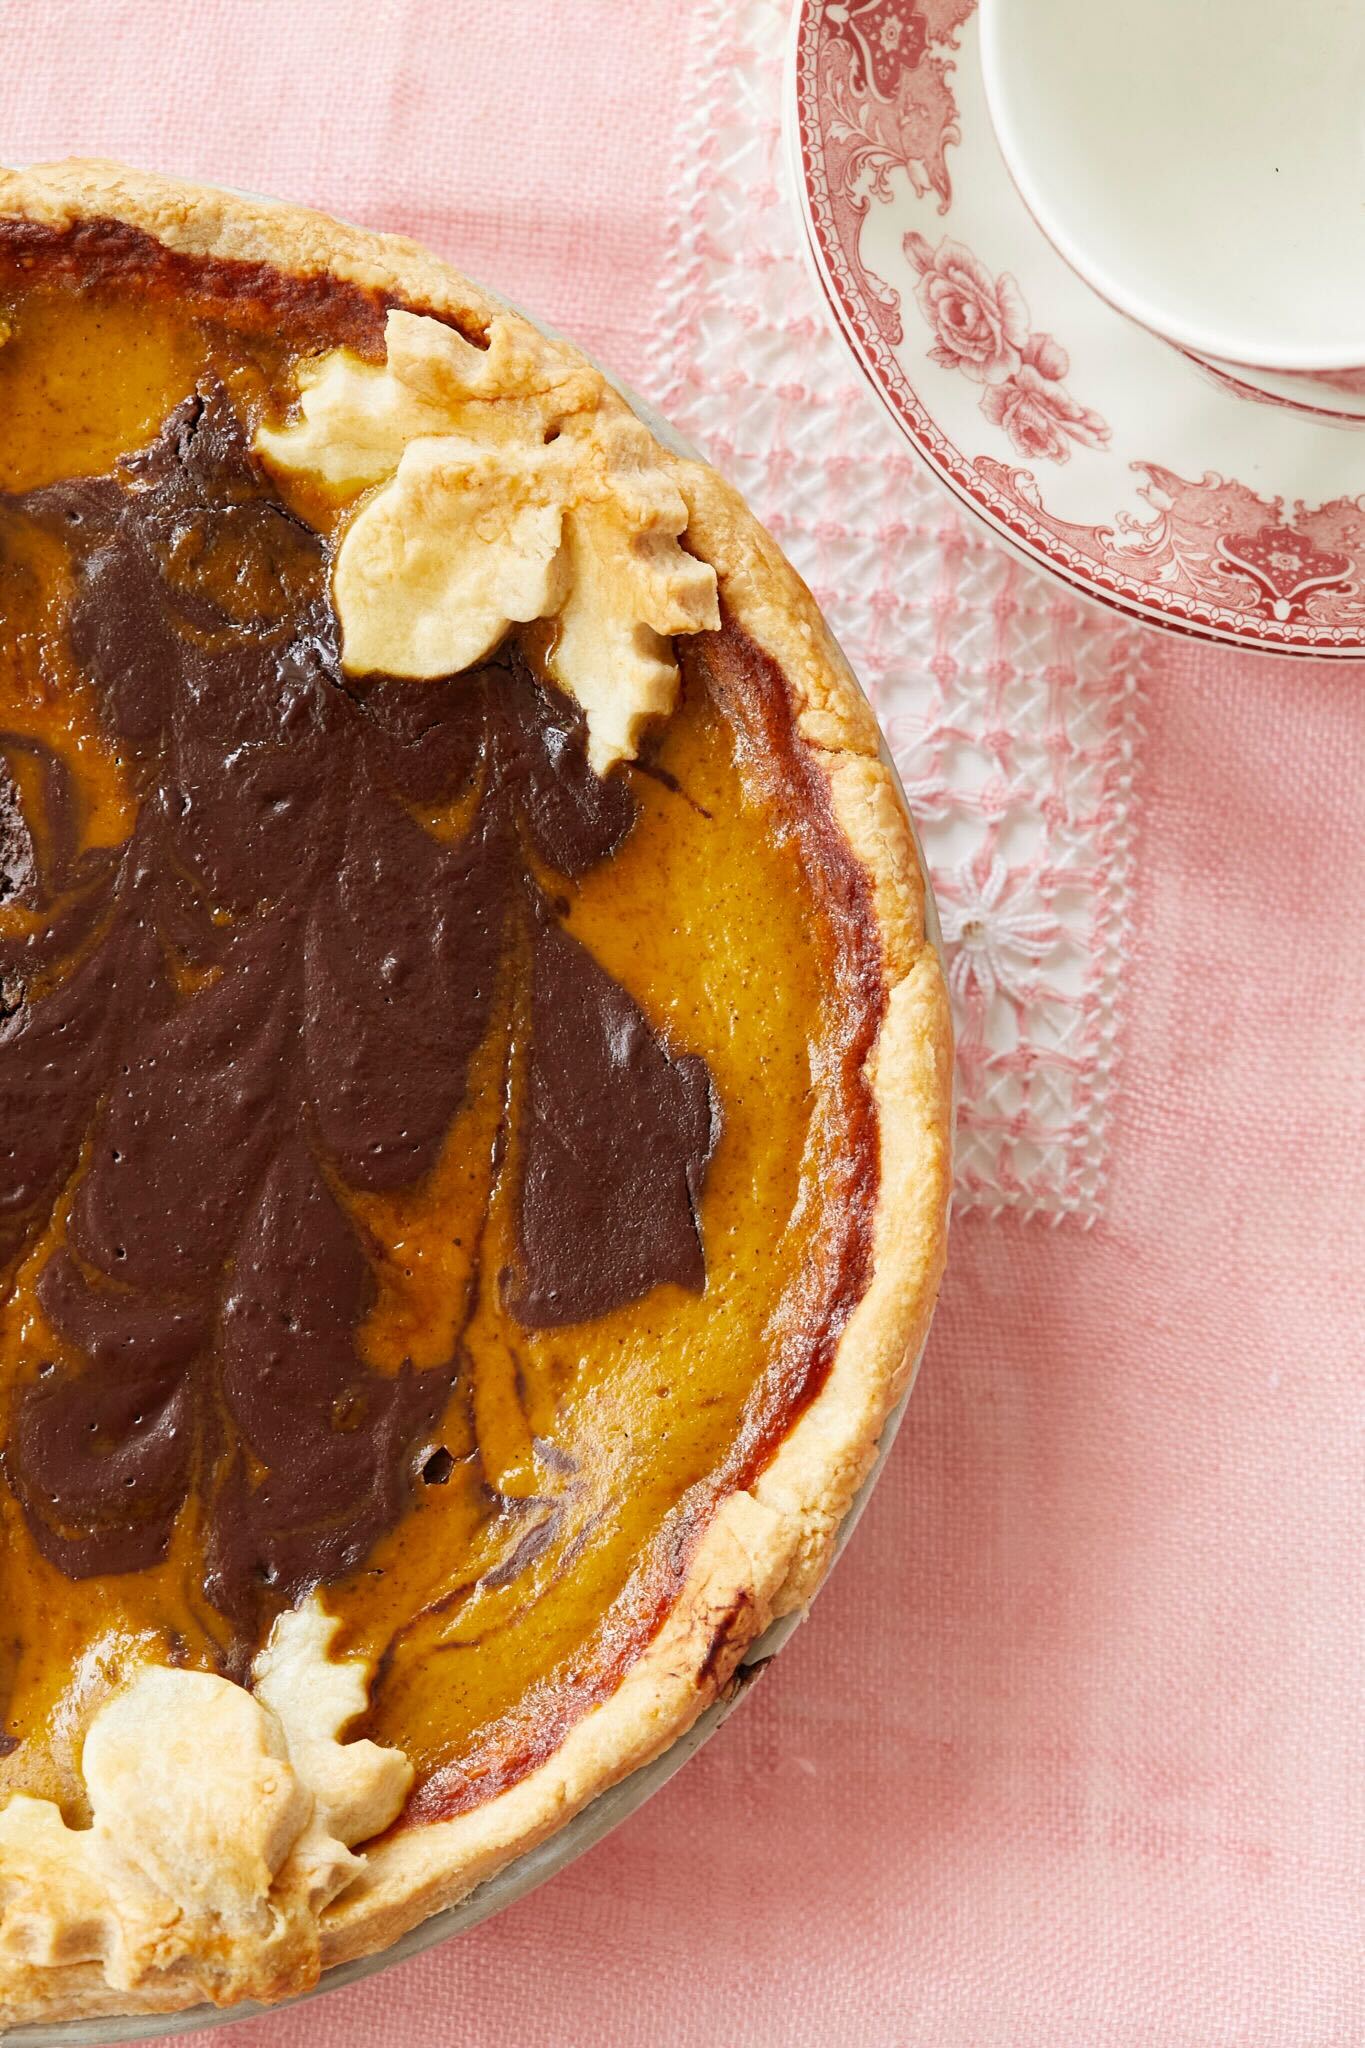 The Chocolate Swirl Pumpkin Pie has golden crust and beautifully marbled filling of chocolate and pumpkin. 